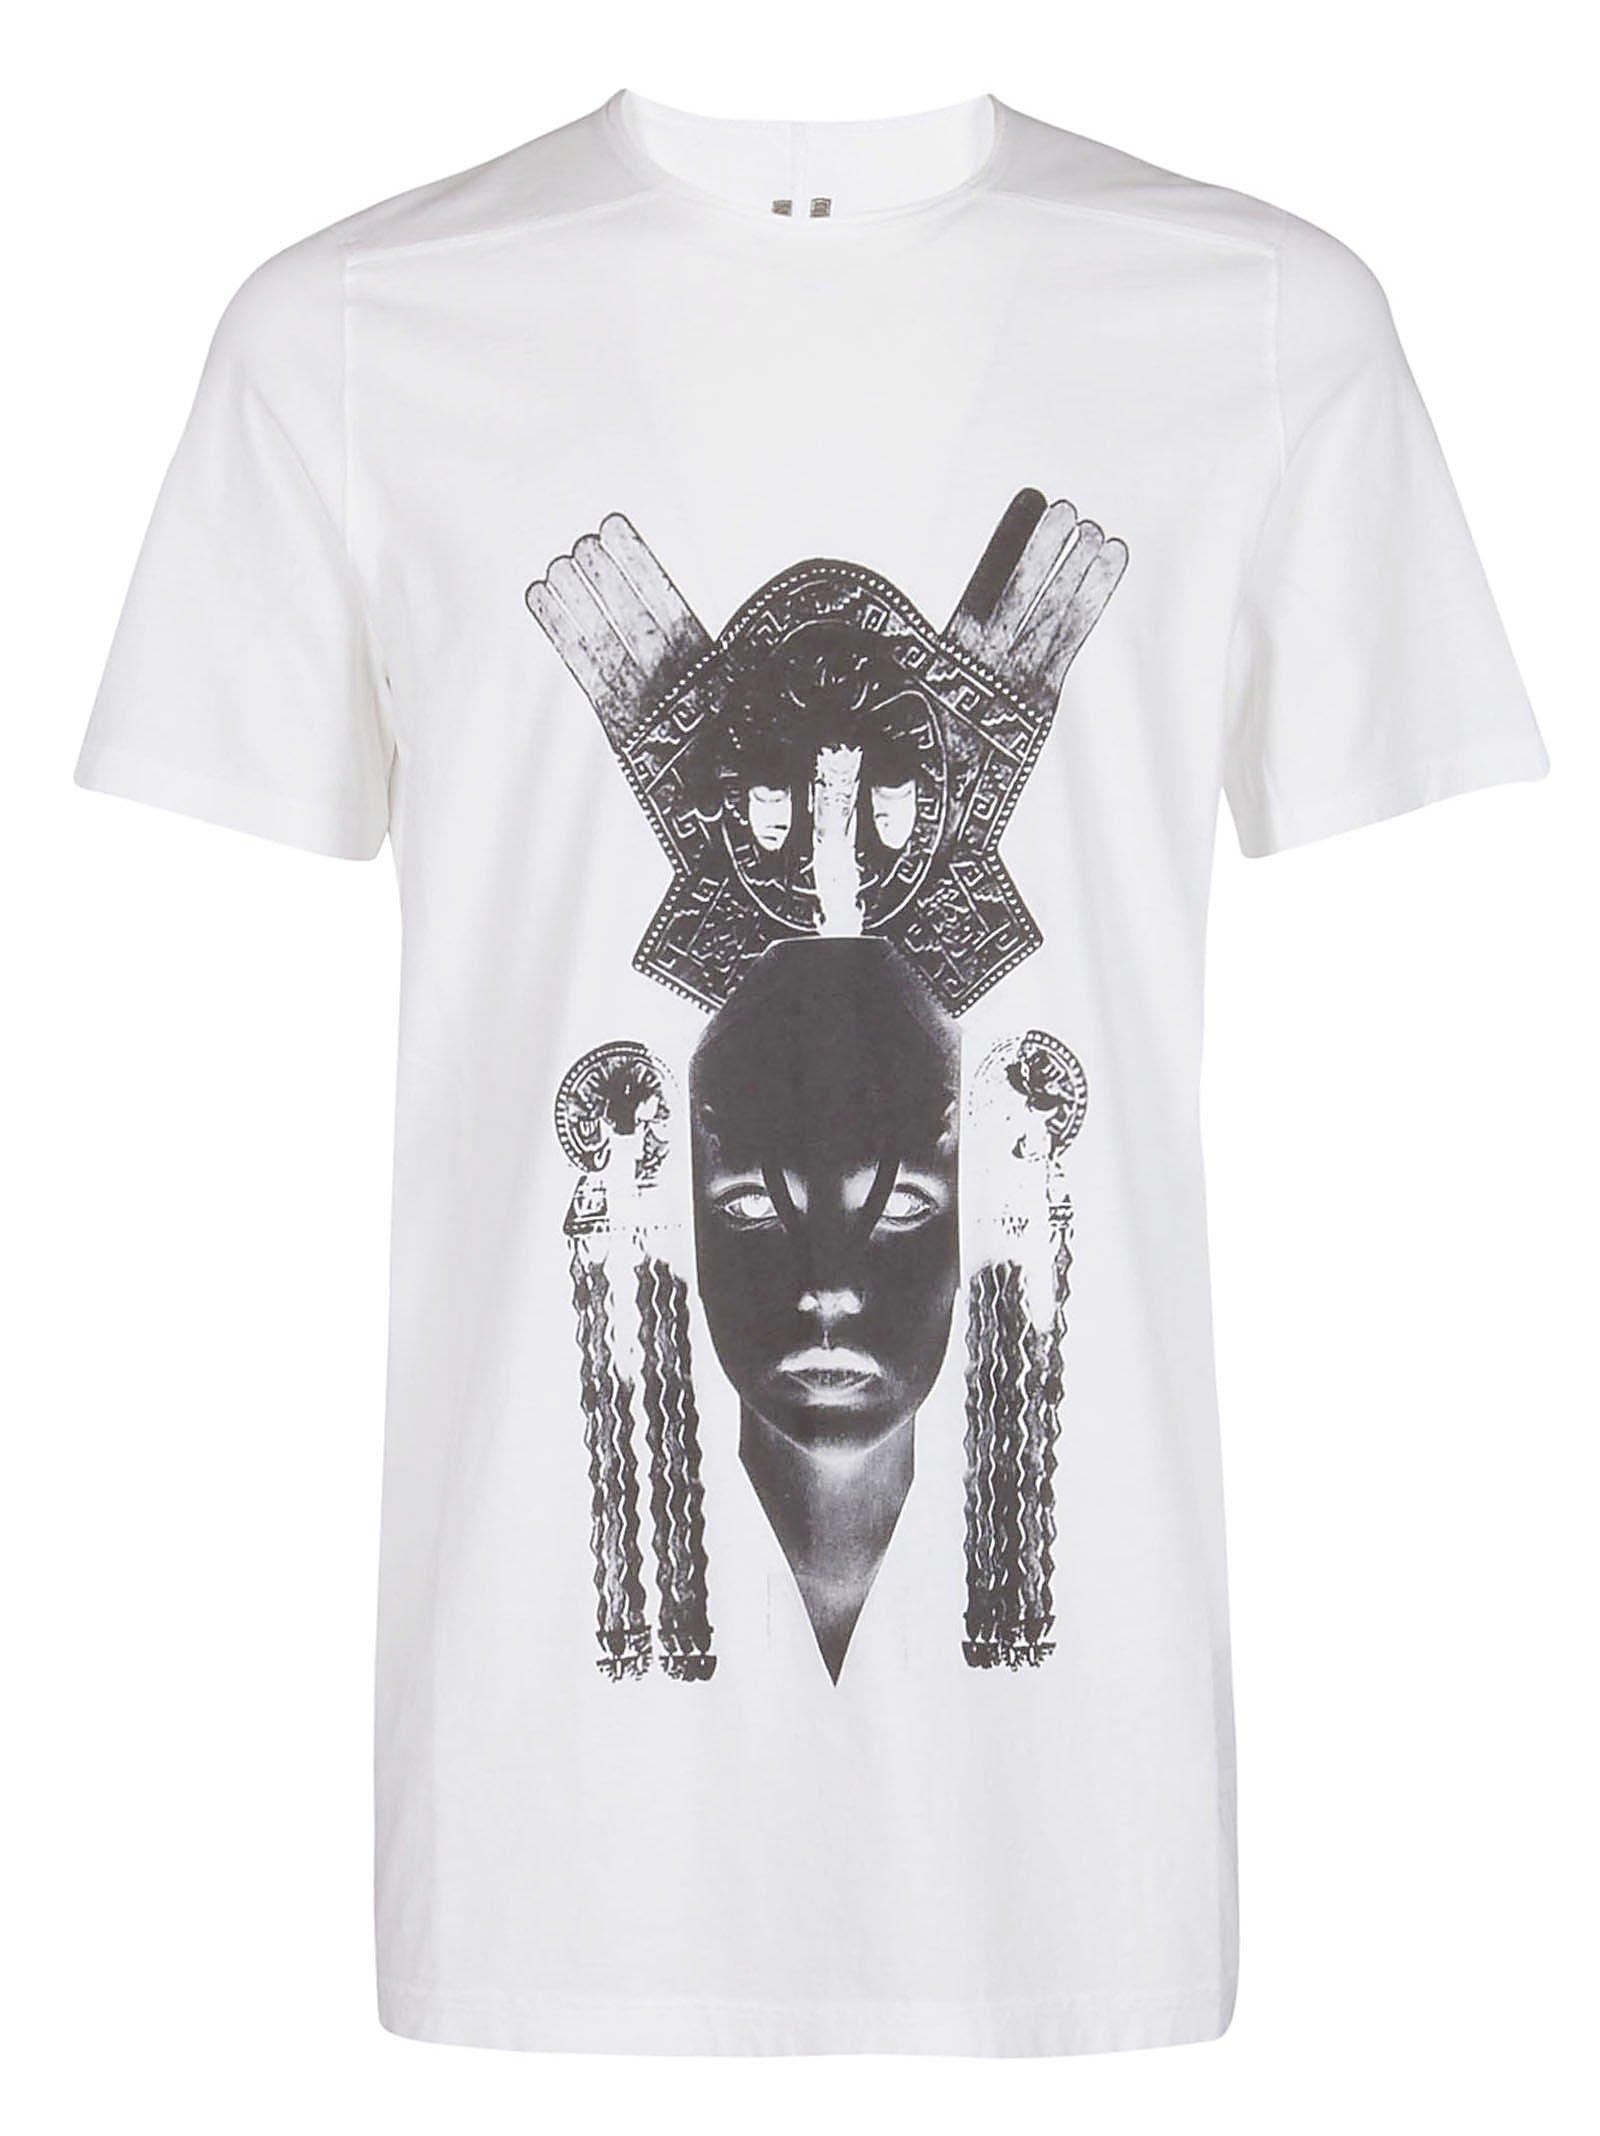 Rick Owens Drkshdw Cotton Printed T-shirt in White for Men - Lyst